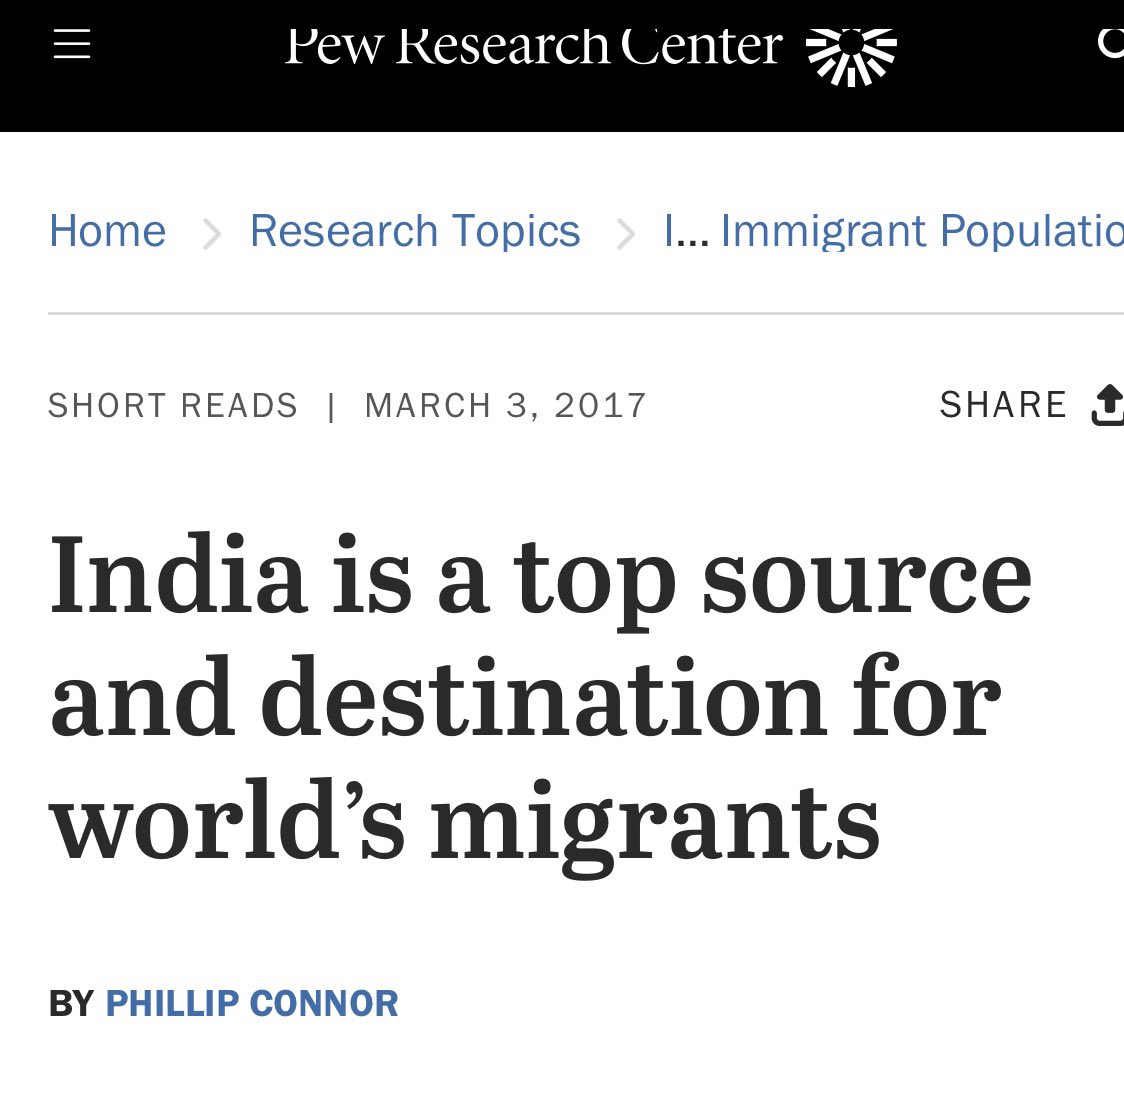 Dear @POTUS, I must respectfully disagree with the characterization of India as xenophobic.

We're a tapestry of cultures, religions, and beliefs - Jews, Zoroastrians, Hindus, Buddhists, Christians, Muslims, Sikhs, Jains, atheists, agnostics, and more. With 1.4 billion strong,…